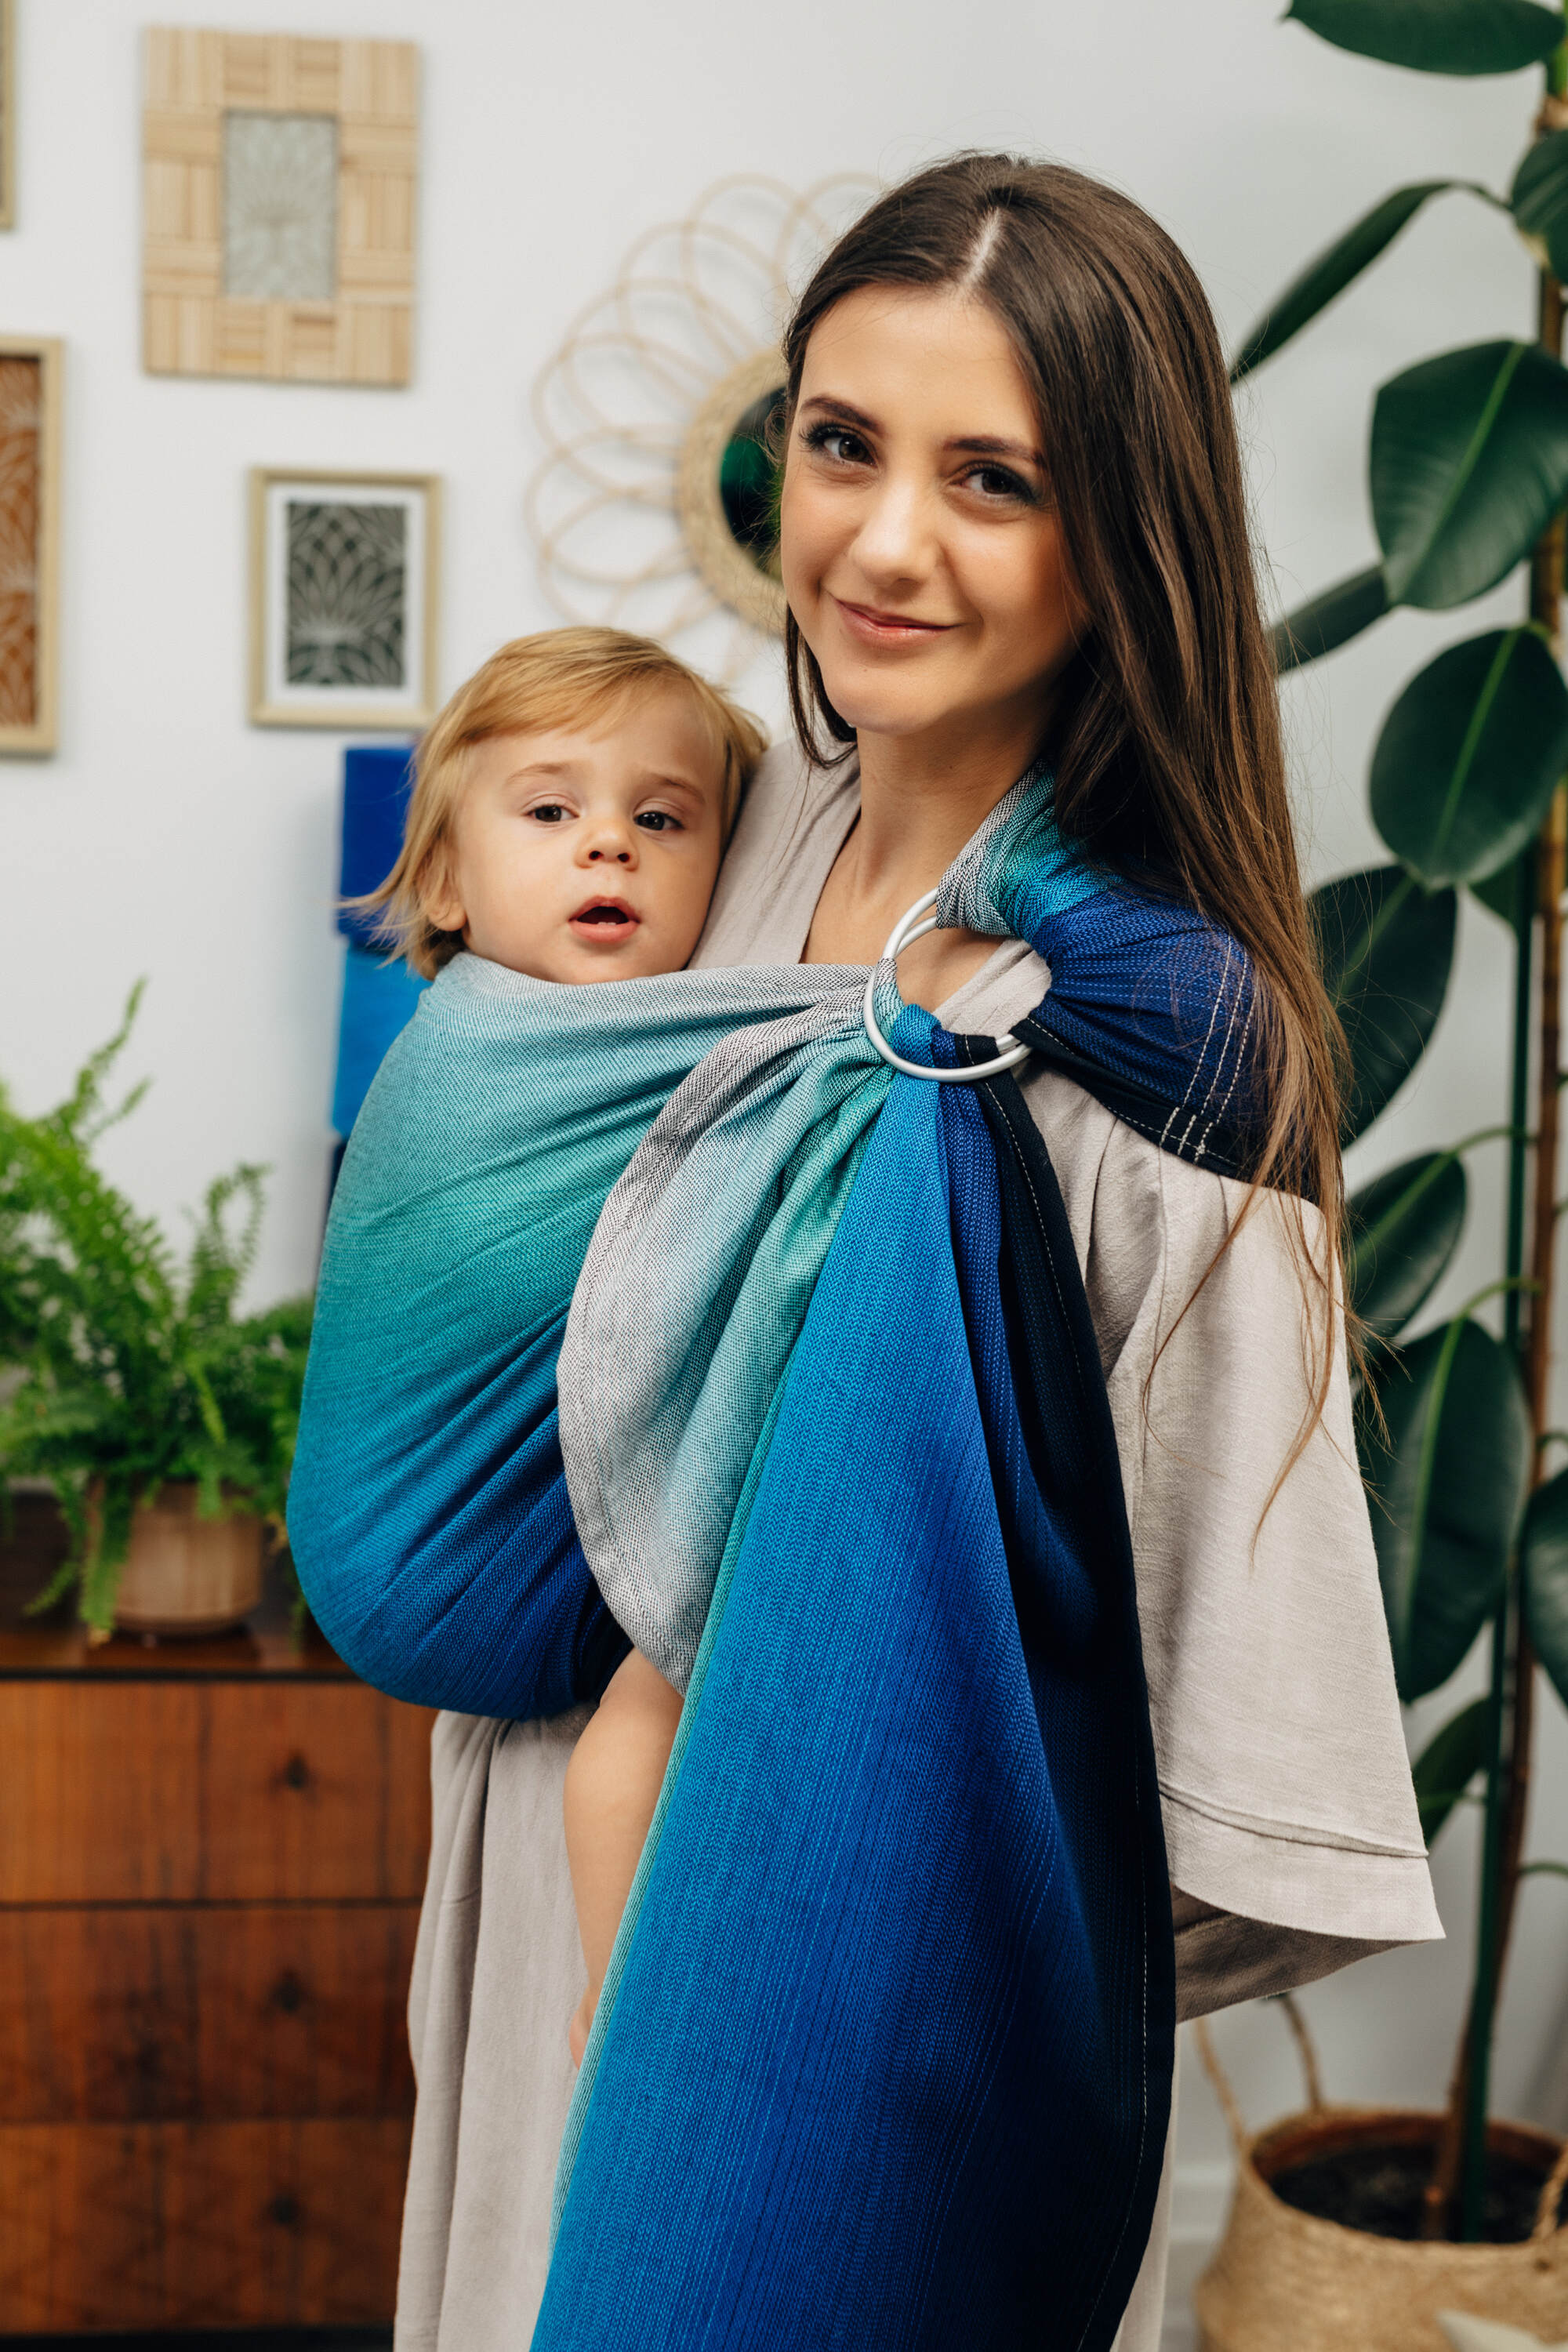 Amazon.com : WildBird - Ring Sling Baby Carrier - Newborn to Up to 35 lbs -  for Moms, Dads & Caregivers - 100% Natural Belgian Linen Fibers - Versatile  & Adjustable - 74” Size - Acadian Fabric & Bronze Ring : Baby